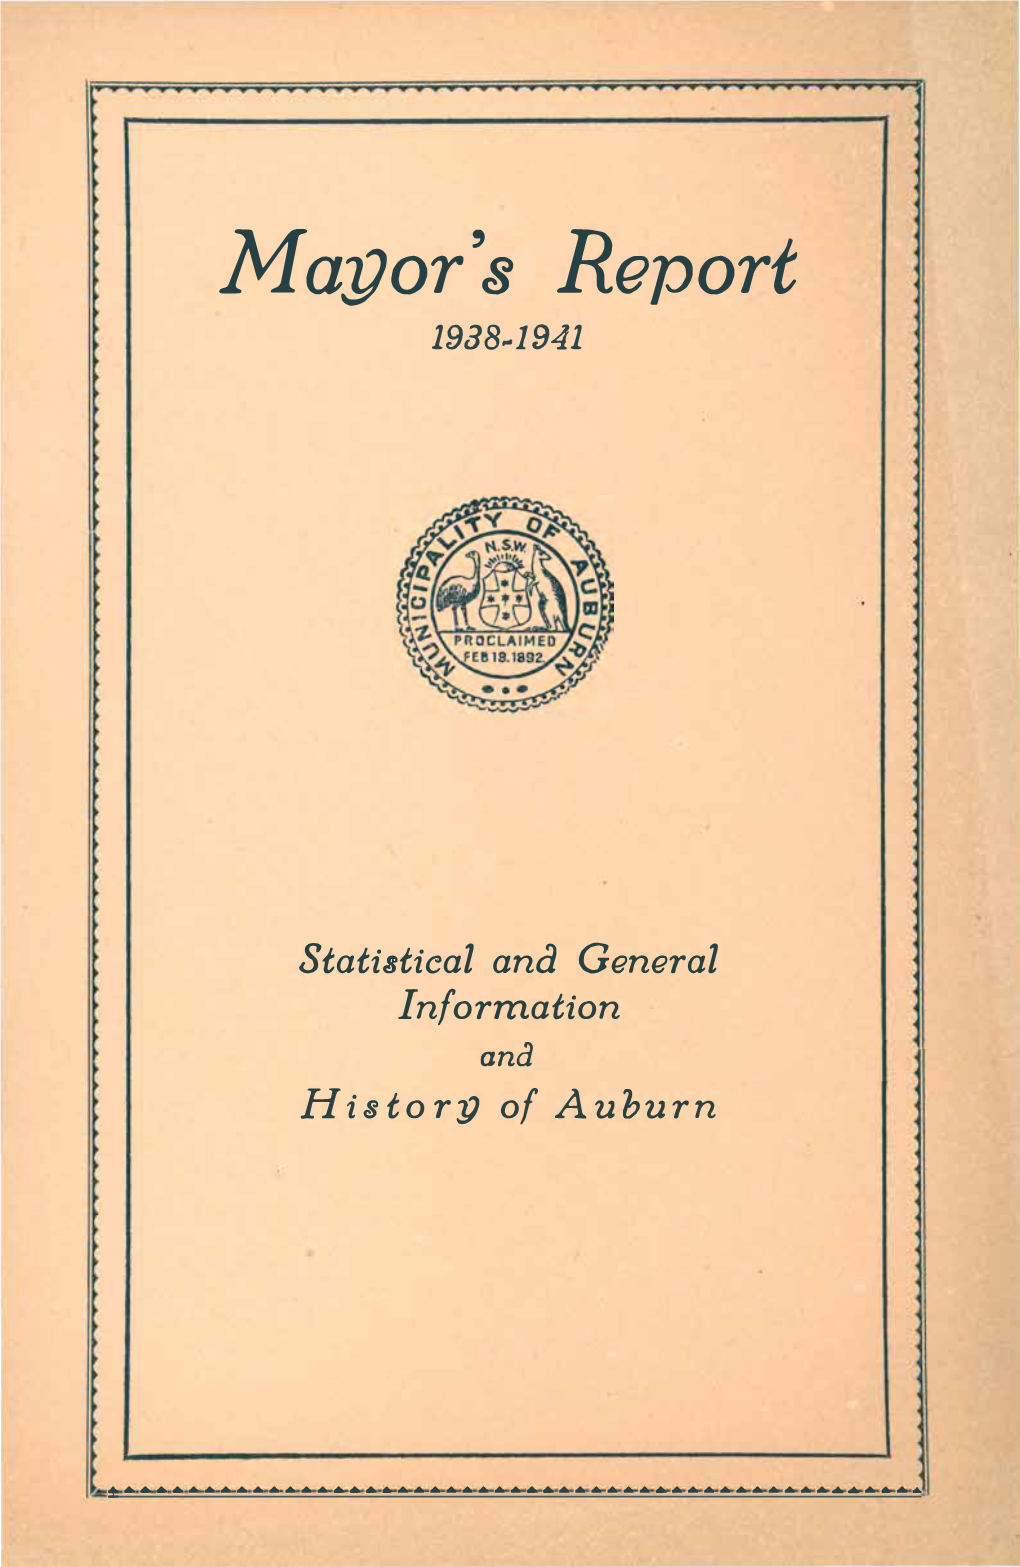 Magor's Report 1938-1941